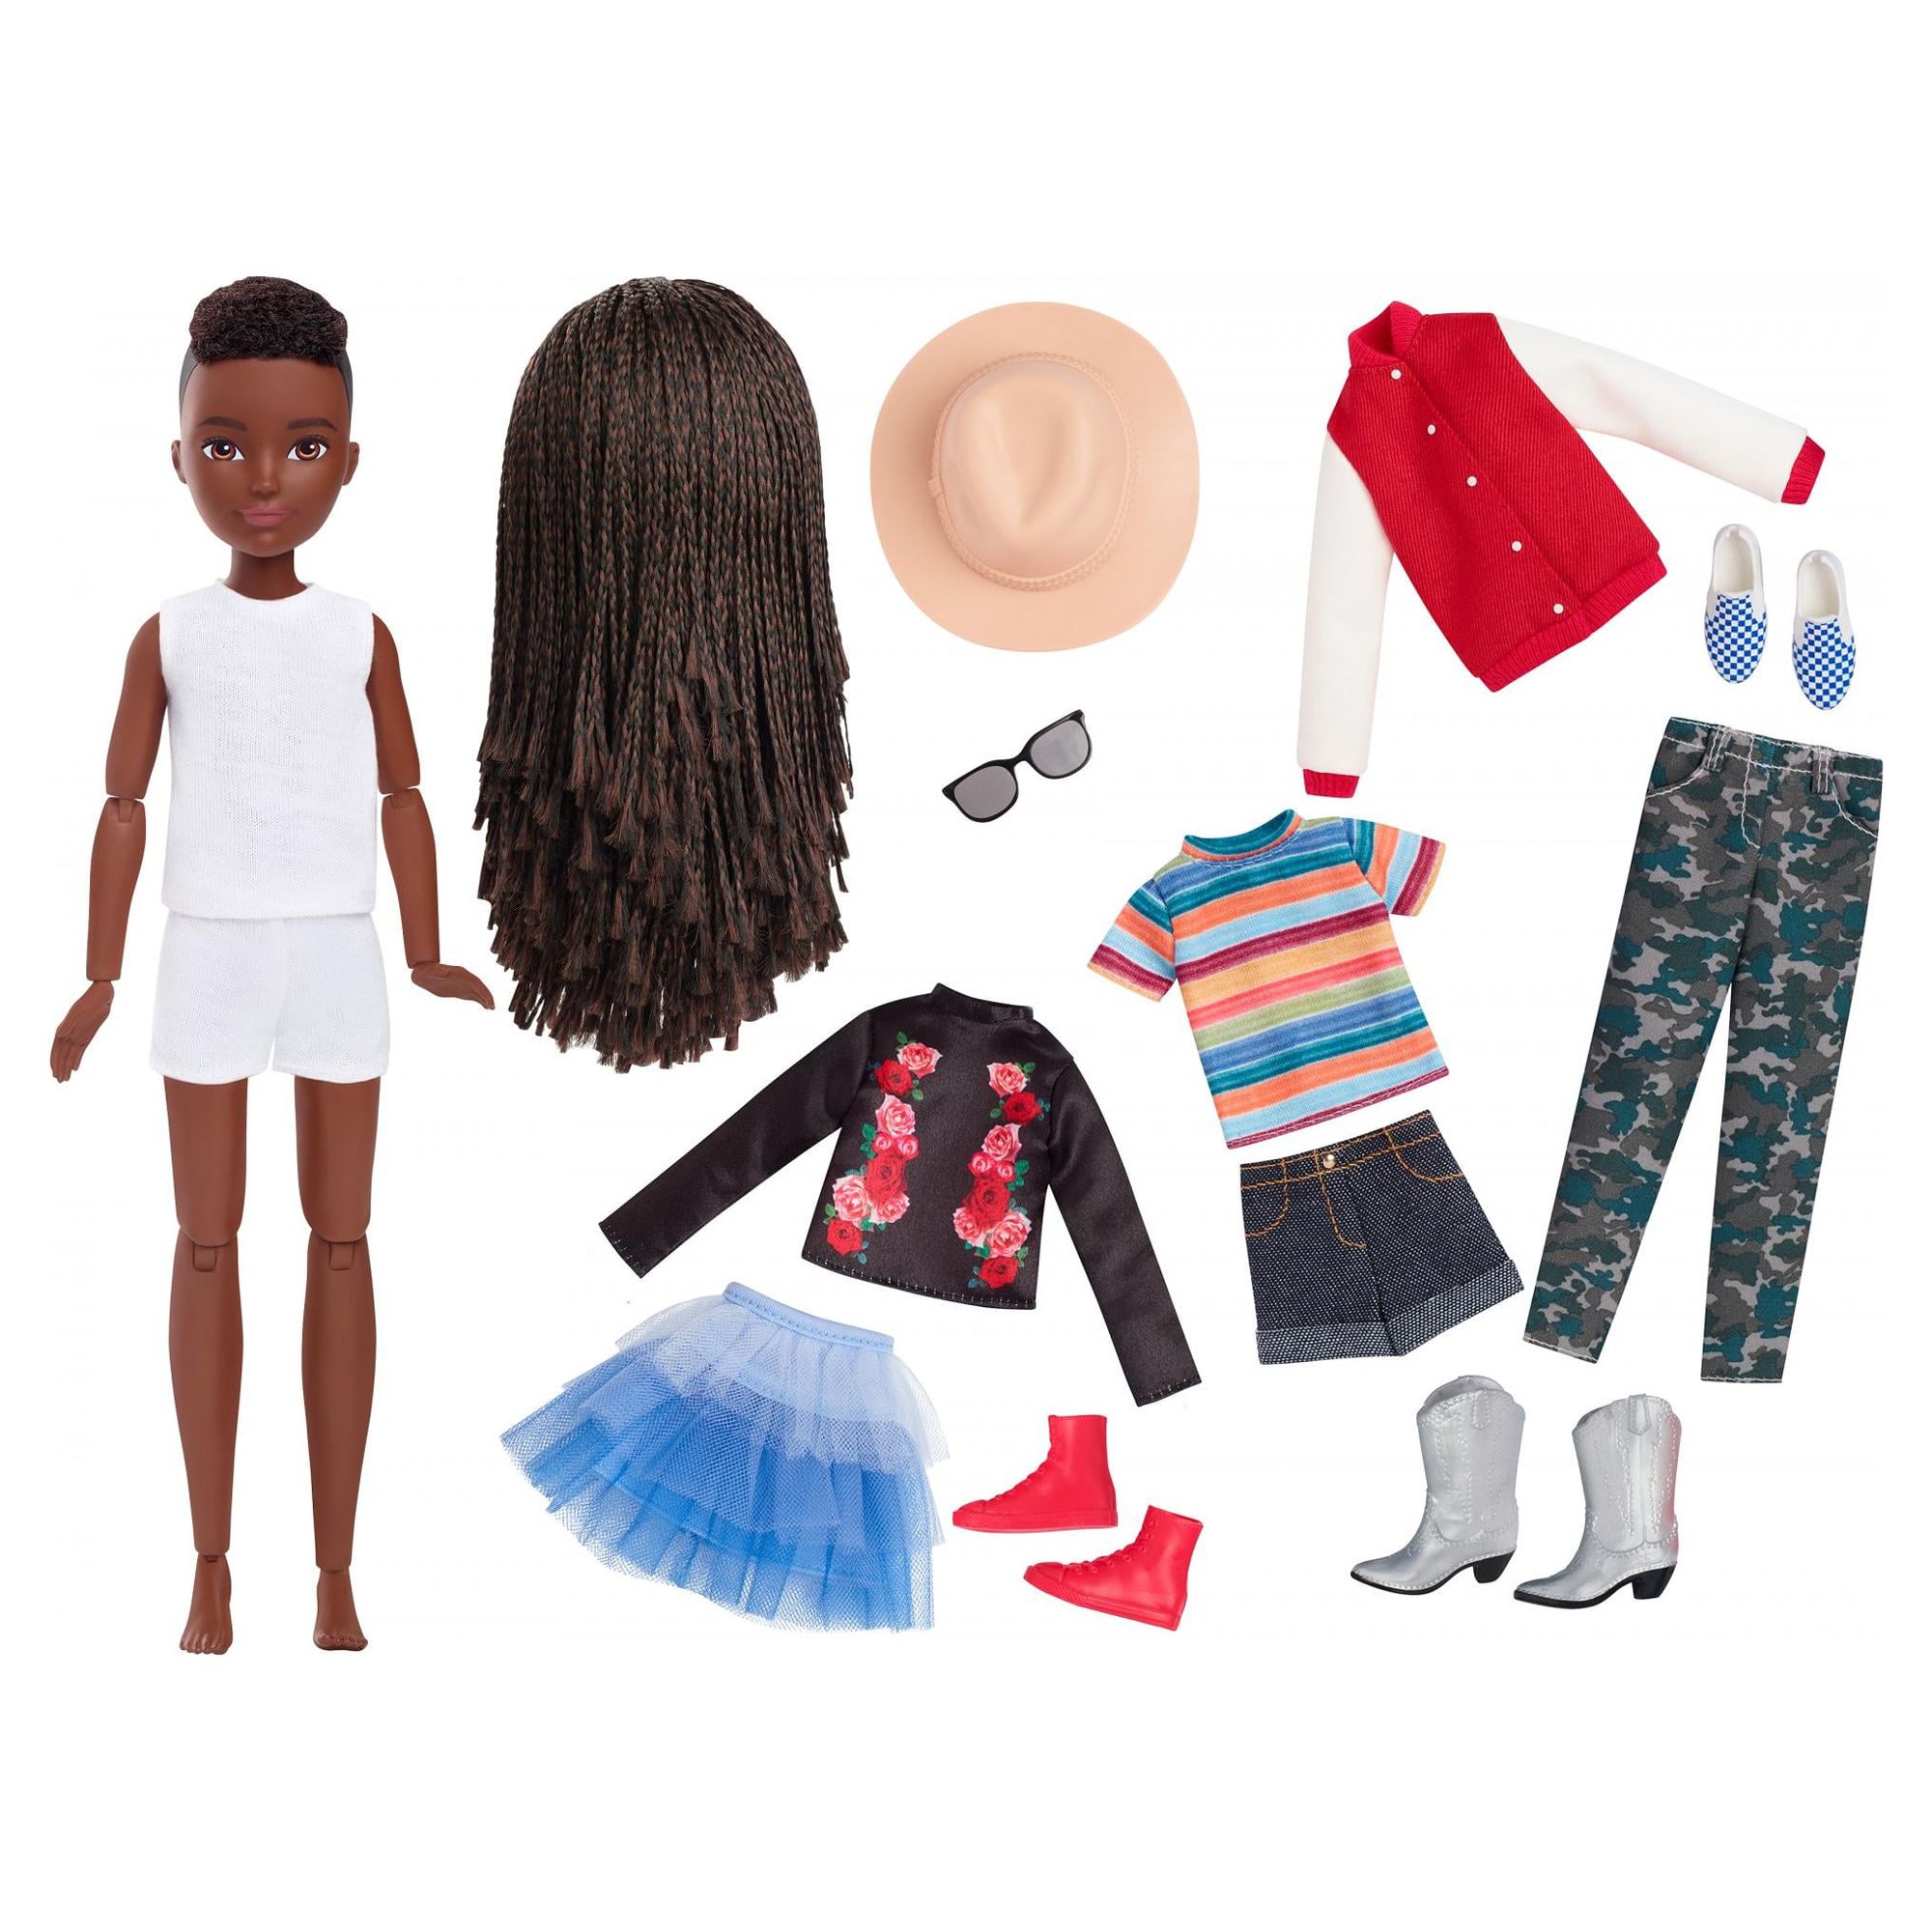 Creatable World Deluxe Character Kit Customizable Doll, Black Braided Hair - image 1 of 7